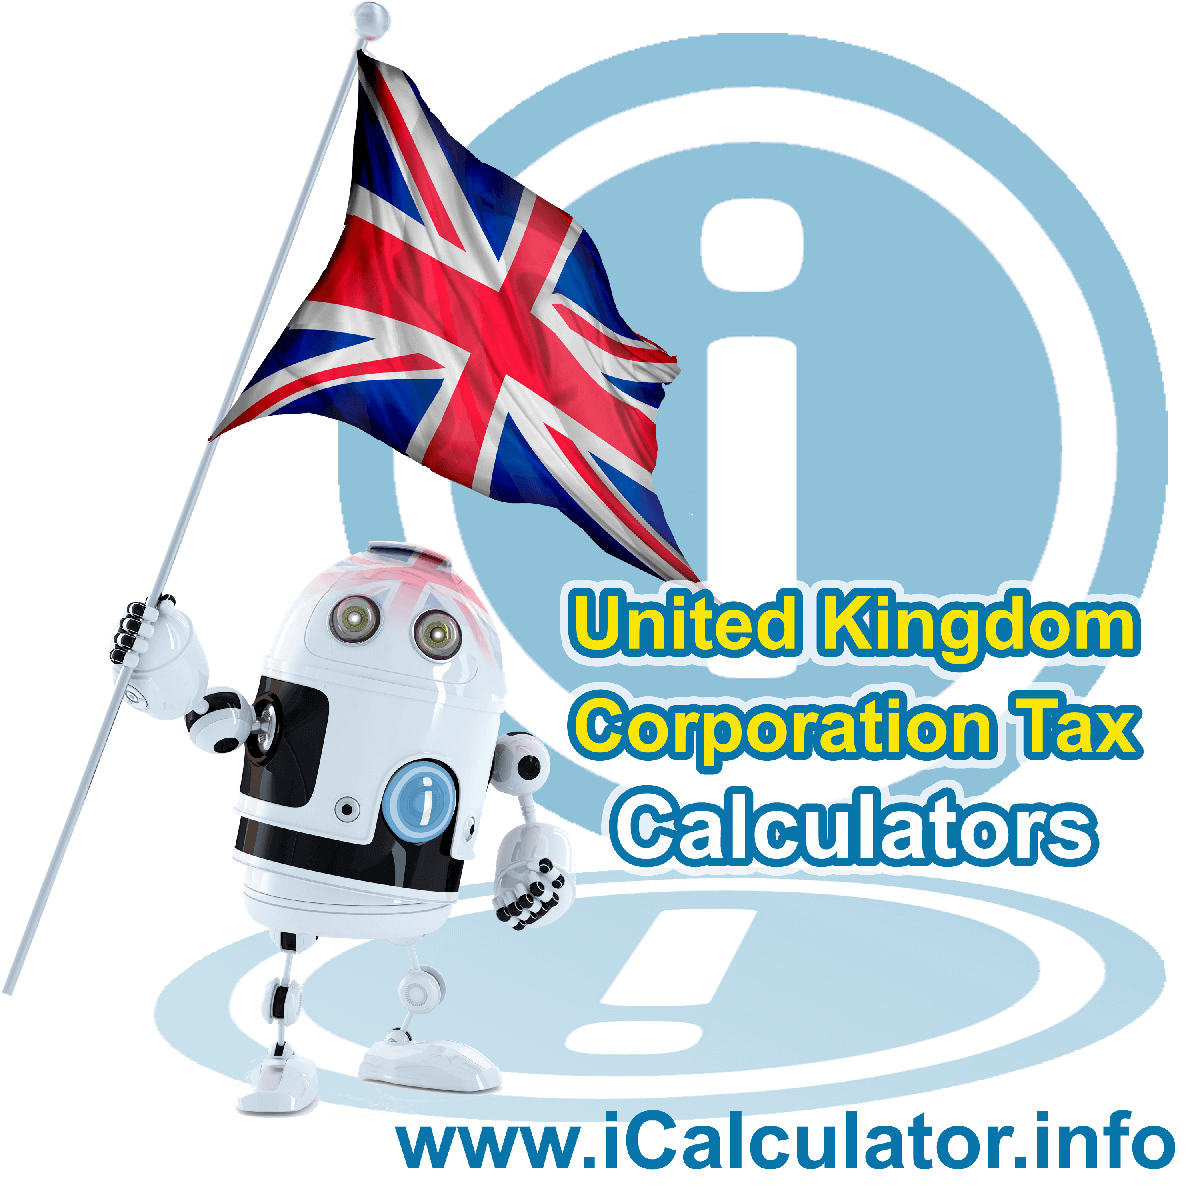 This image shows details about corporation tax calculation in the UK including finance and tax formula used to calculate corporation tax in the UK as integrated in the UK Corporation Tax Calculator 2023/24